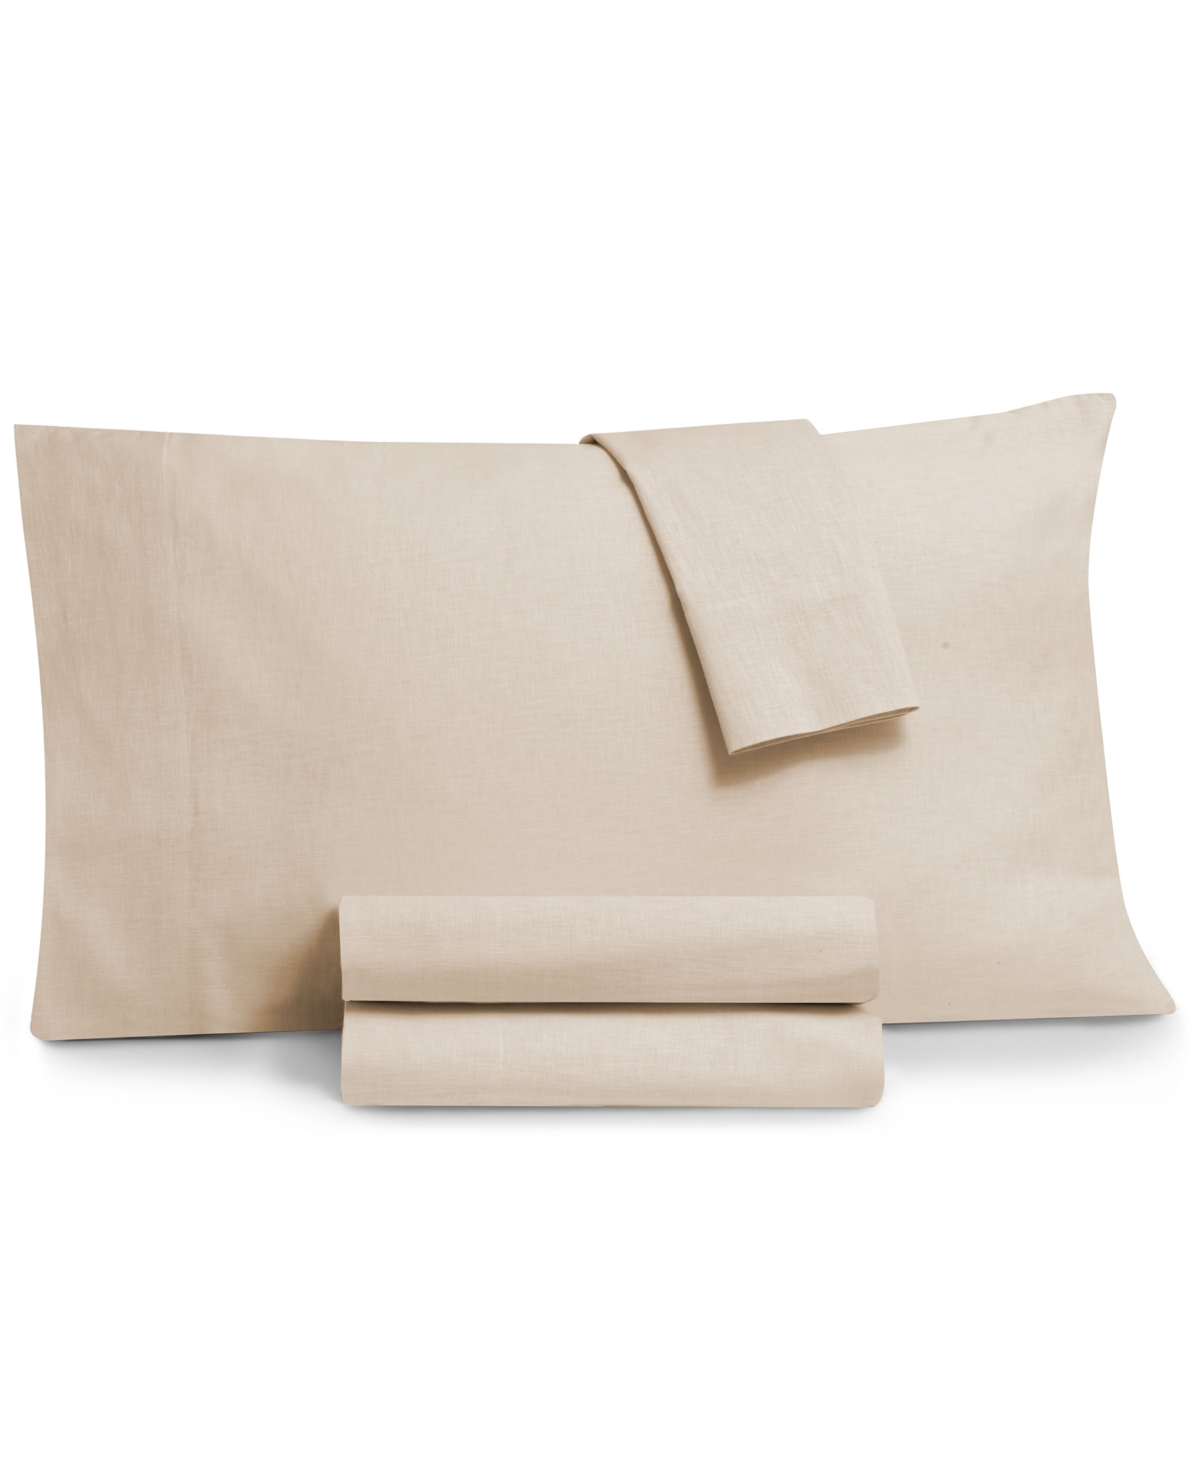 Tranquil Home Cotton Linen Look 4-pc. Sheet Set, King In Natural